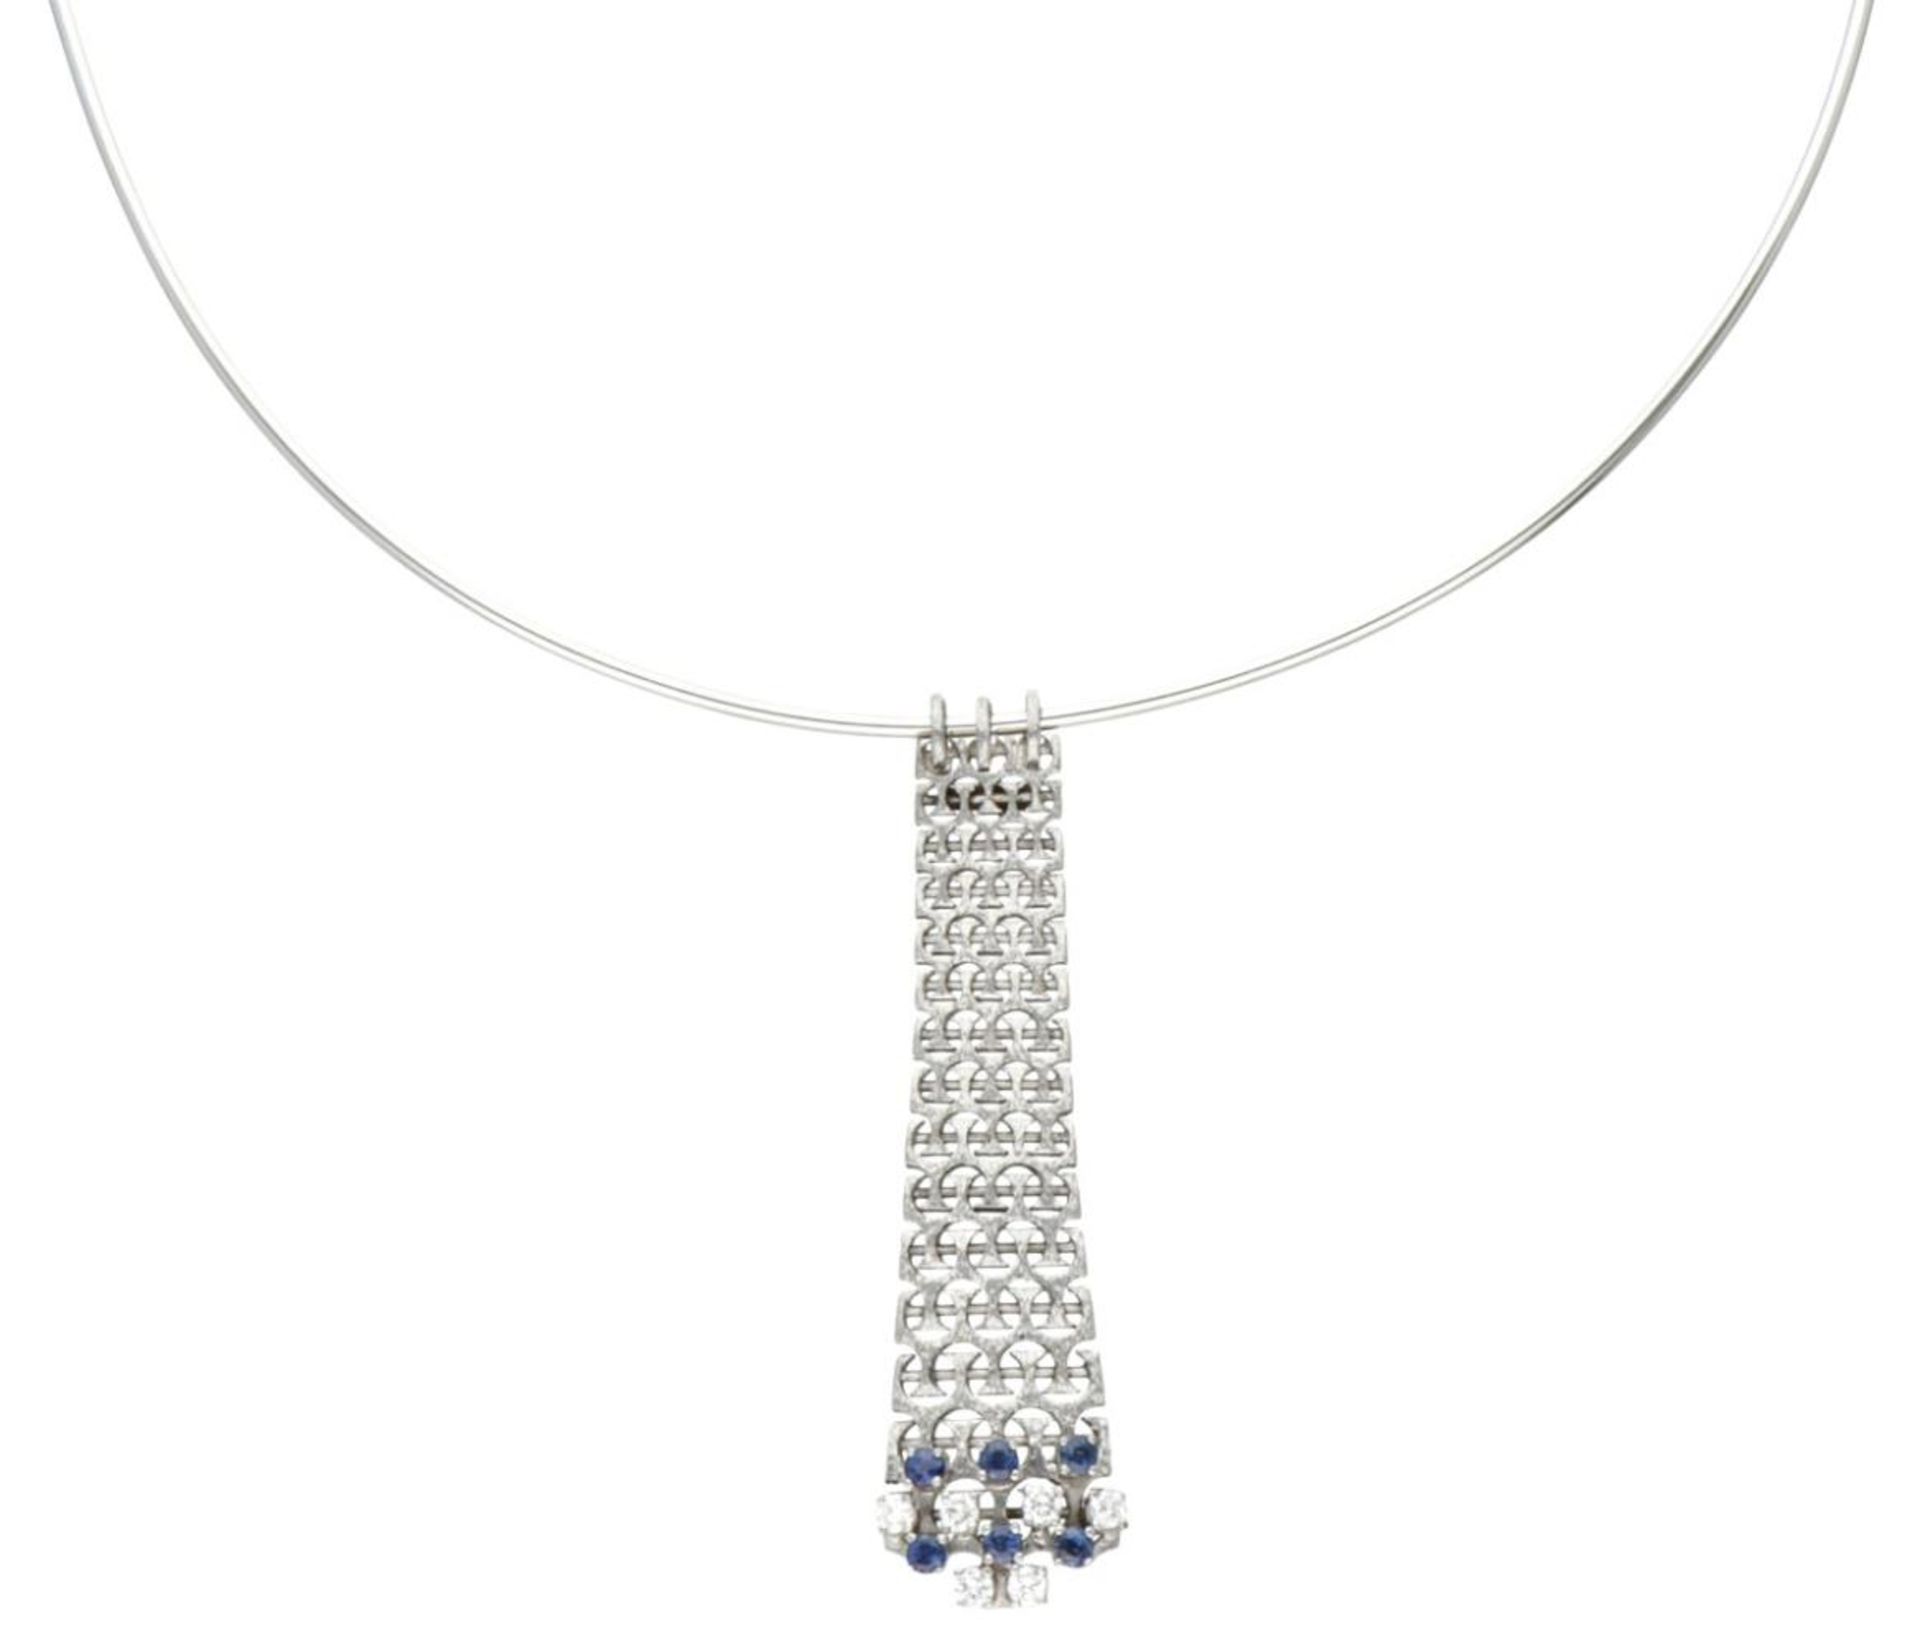 18K. White gold collar necklace and pendant set with approx. 0.36 ct. diamond and natural sapphire.